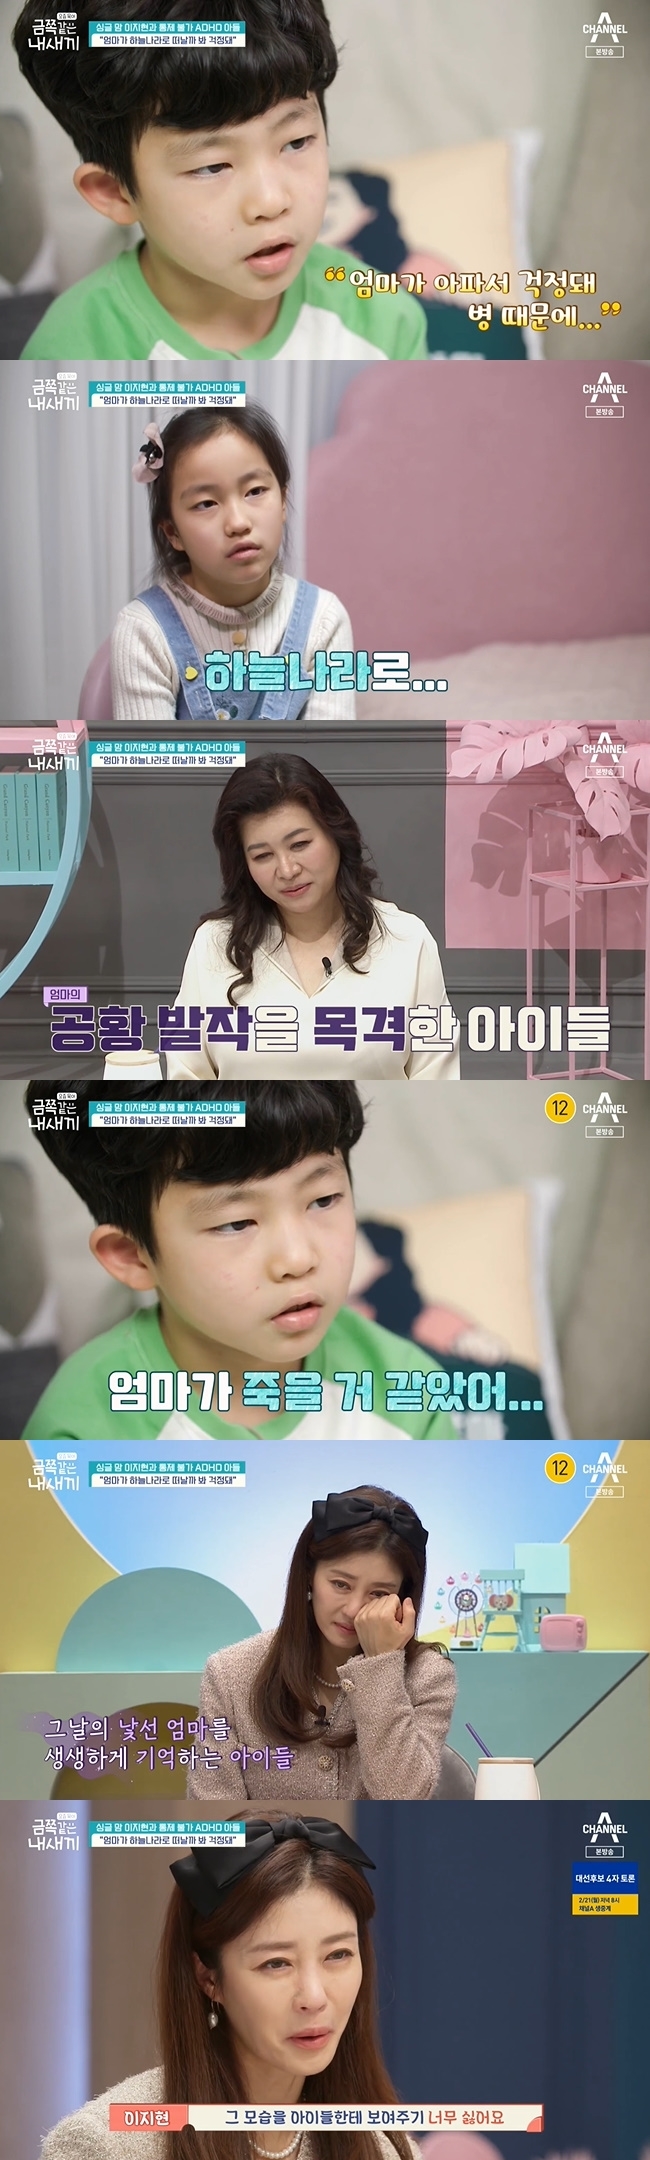 Lee Ji Hyun tears in her health-worried children heart after Fade to Black her panic disorder BalzacChannel A Parenting - My Kid like this, which was broadcast on February 18, expressed Lee Ji Hyuns daughter and sons love for their mother.In the inside of the broadcast, the gold and the sister were difficult because of each other like a daily routine.My sister said that she beat me first, and that she hit me first, she said. If she has a sister, shes on her side.Because I know that my mother is already on my side. She cited the happy moment when she smiled happily. She mentioned her mothers health as a concern.Im worried that my mother will leave for heaven, she said, and she was taken in an ambulance, paralyzed in her eyes and paralyzed in her hands.My mother was really in pain on the bed. I felt like she was going to die. I was surprised and upset, he said.When asked about his wish, he said, I live happily with my mother and live without illness. My sister also said, I can not live without my mother, so I want to protect my mother.